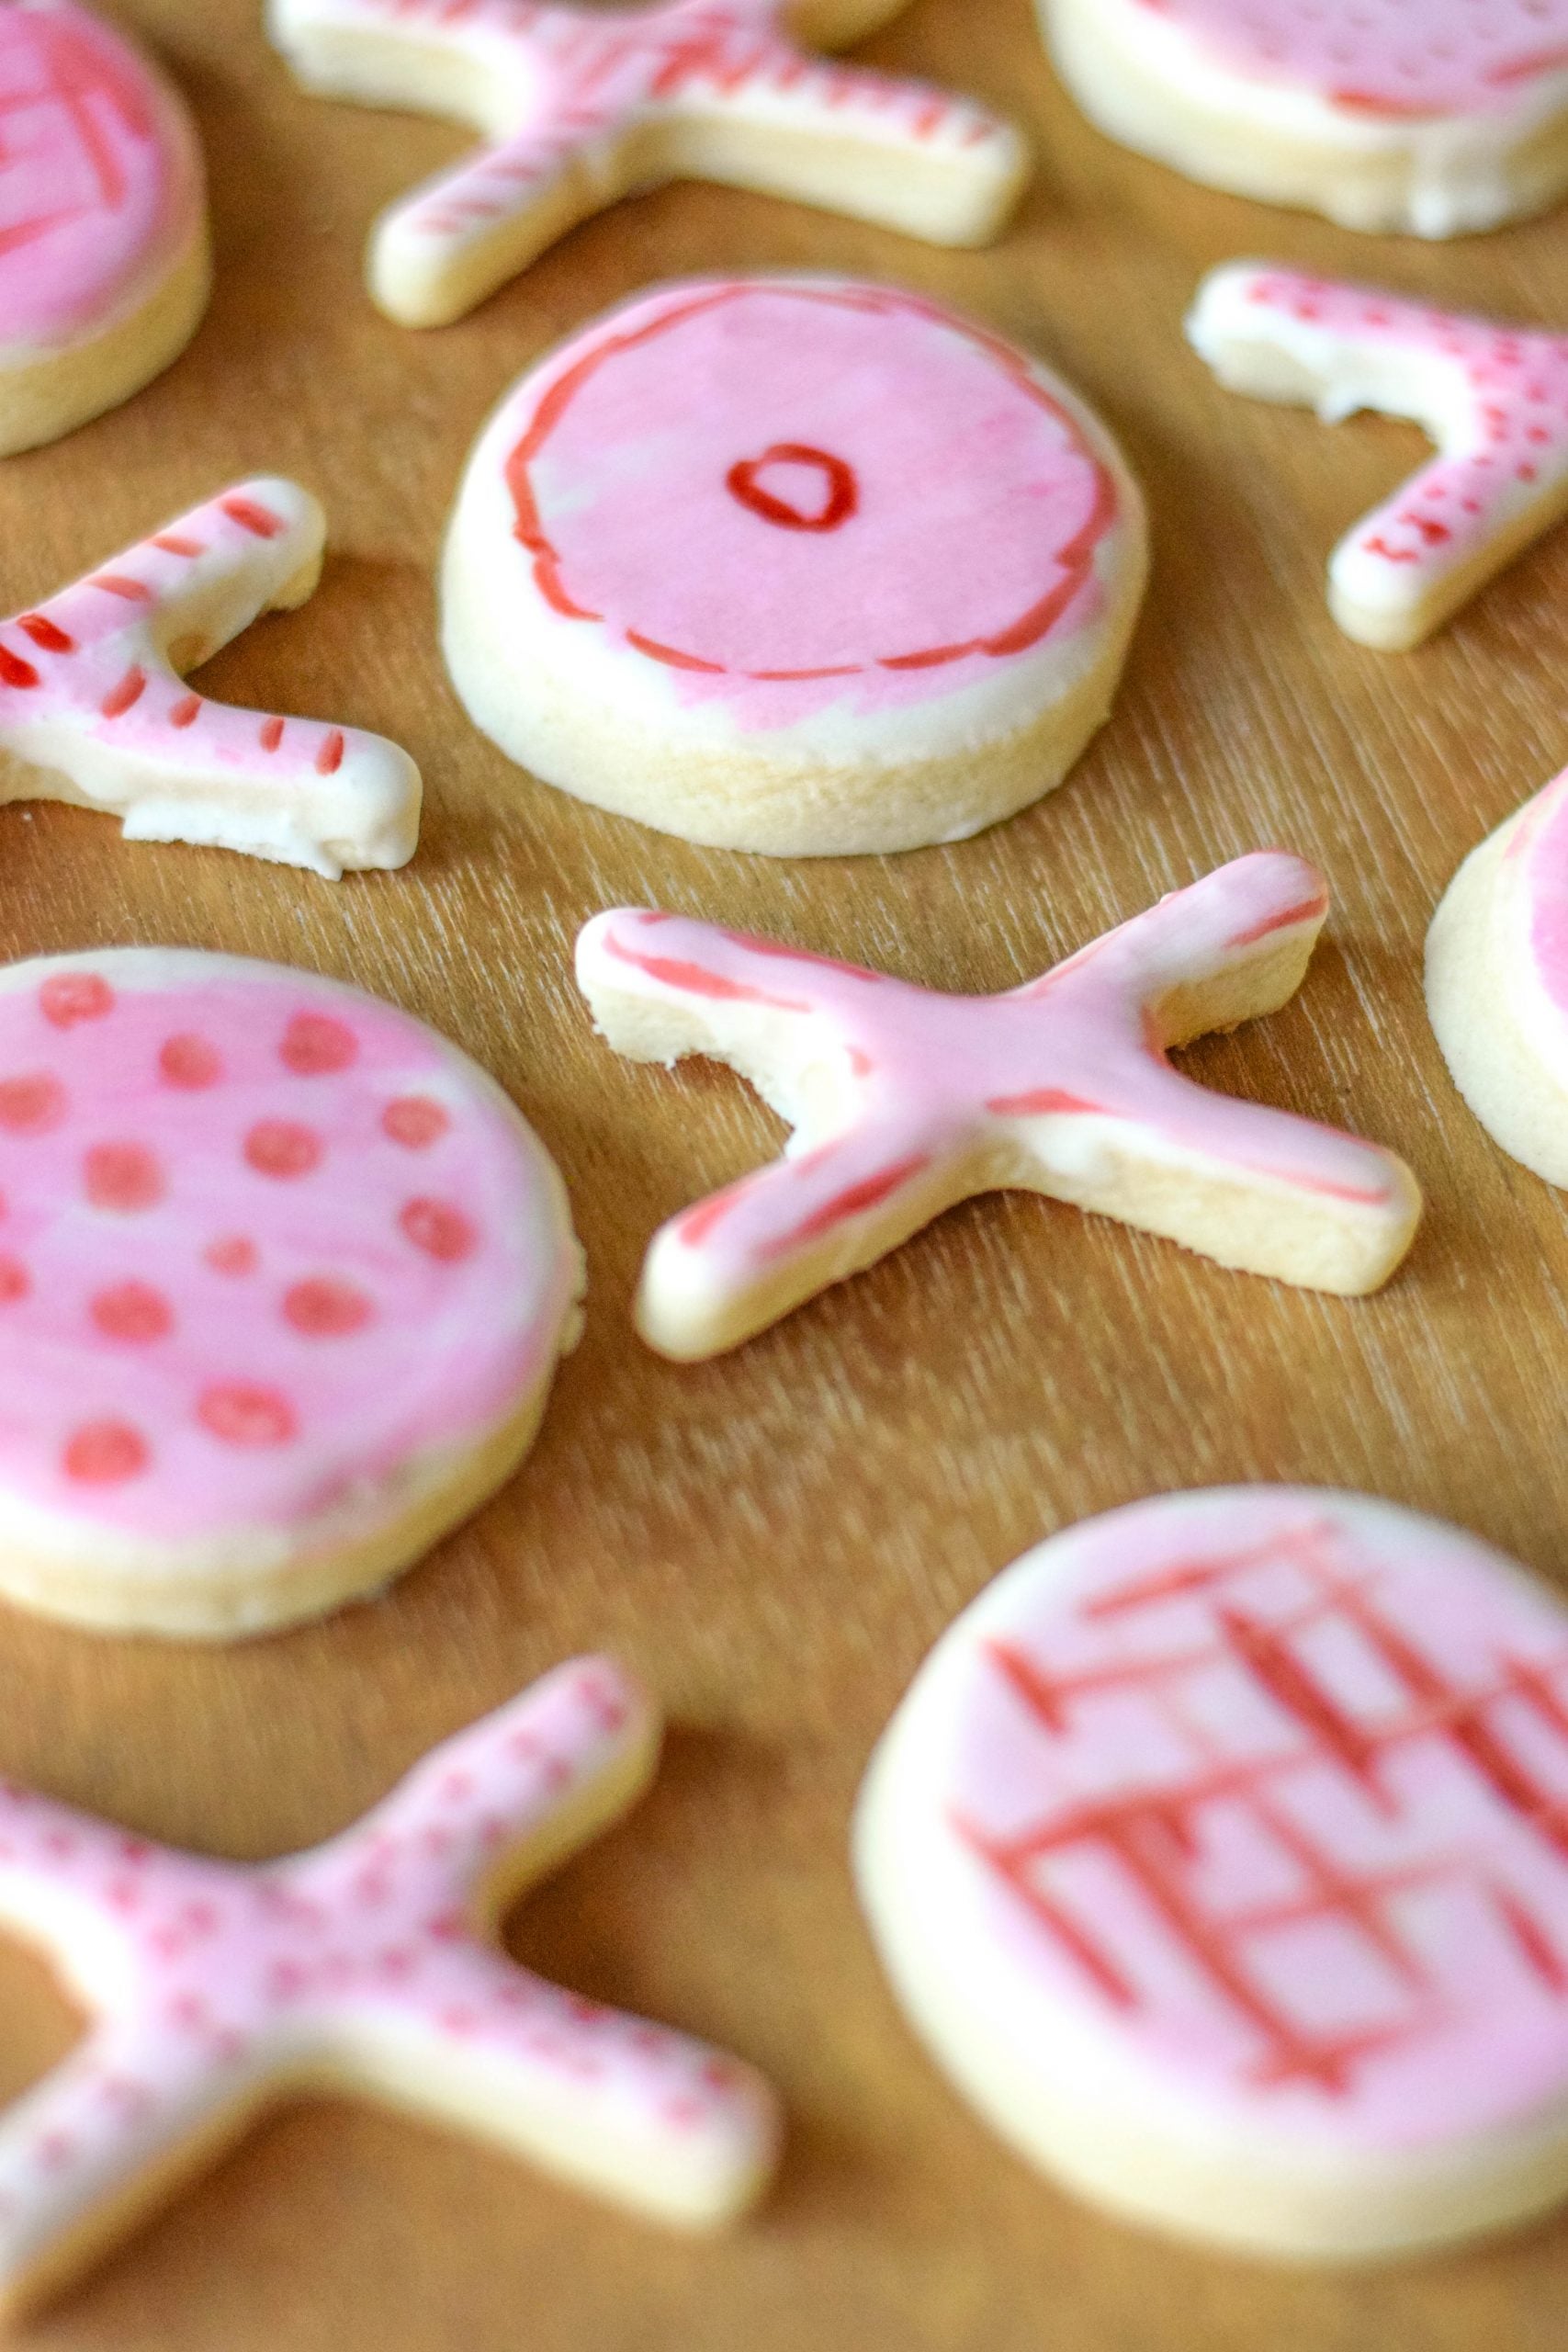 XOXO Painted Sugar Cookies For Valentine's Day - Delicious hand painted sugar cookies that come together easily and will impress all your friends! | XOXO Cookies - Painted Sugar Cookies - Hand Painted Sugar Cookies - Valentine's Day Cookies - Paint Your Own Cookie